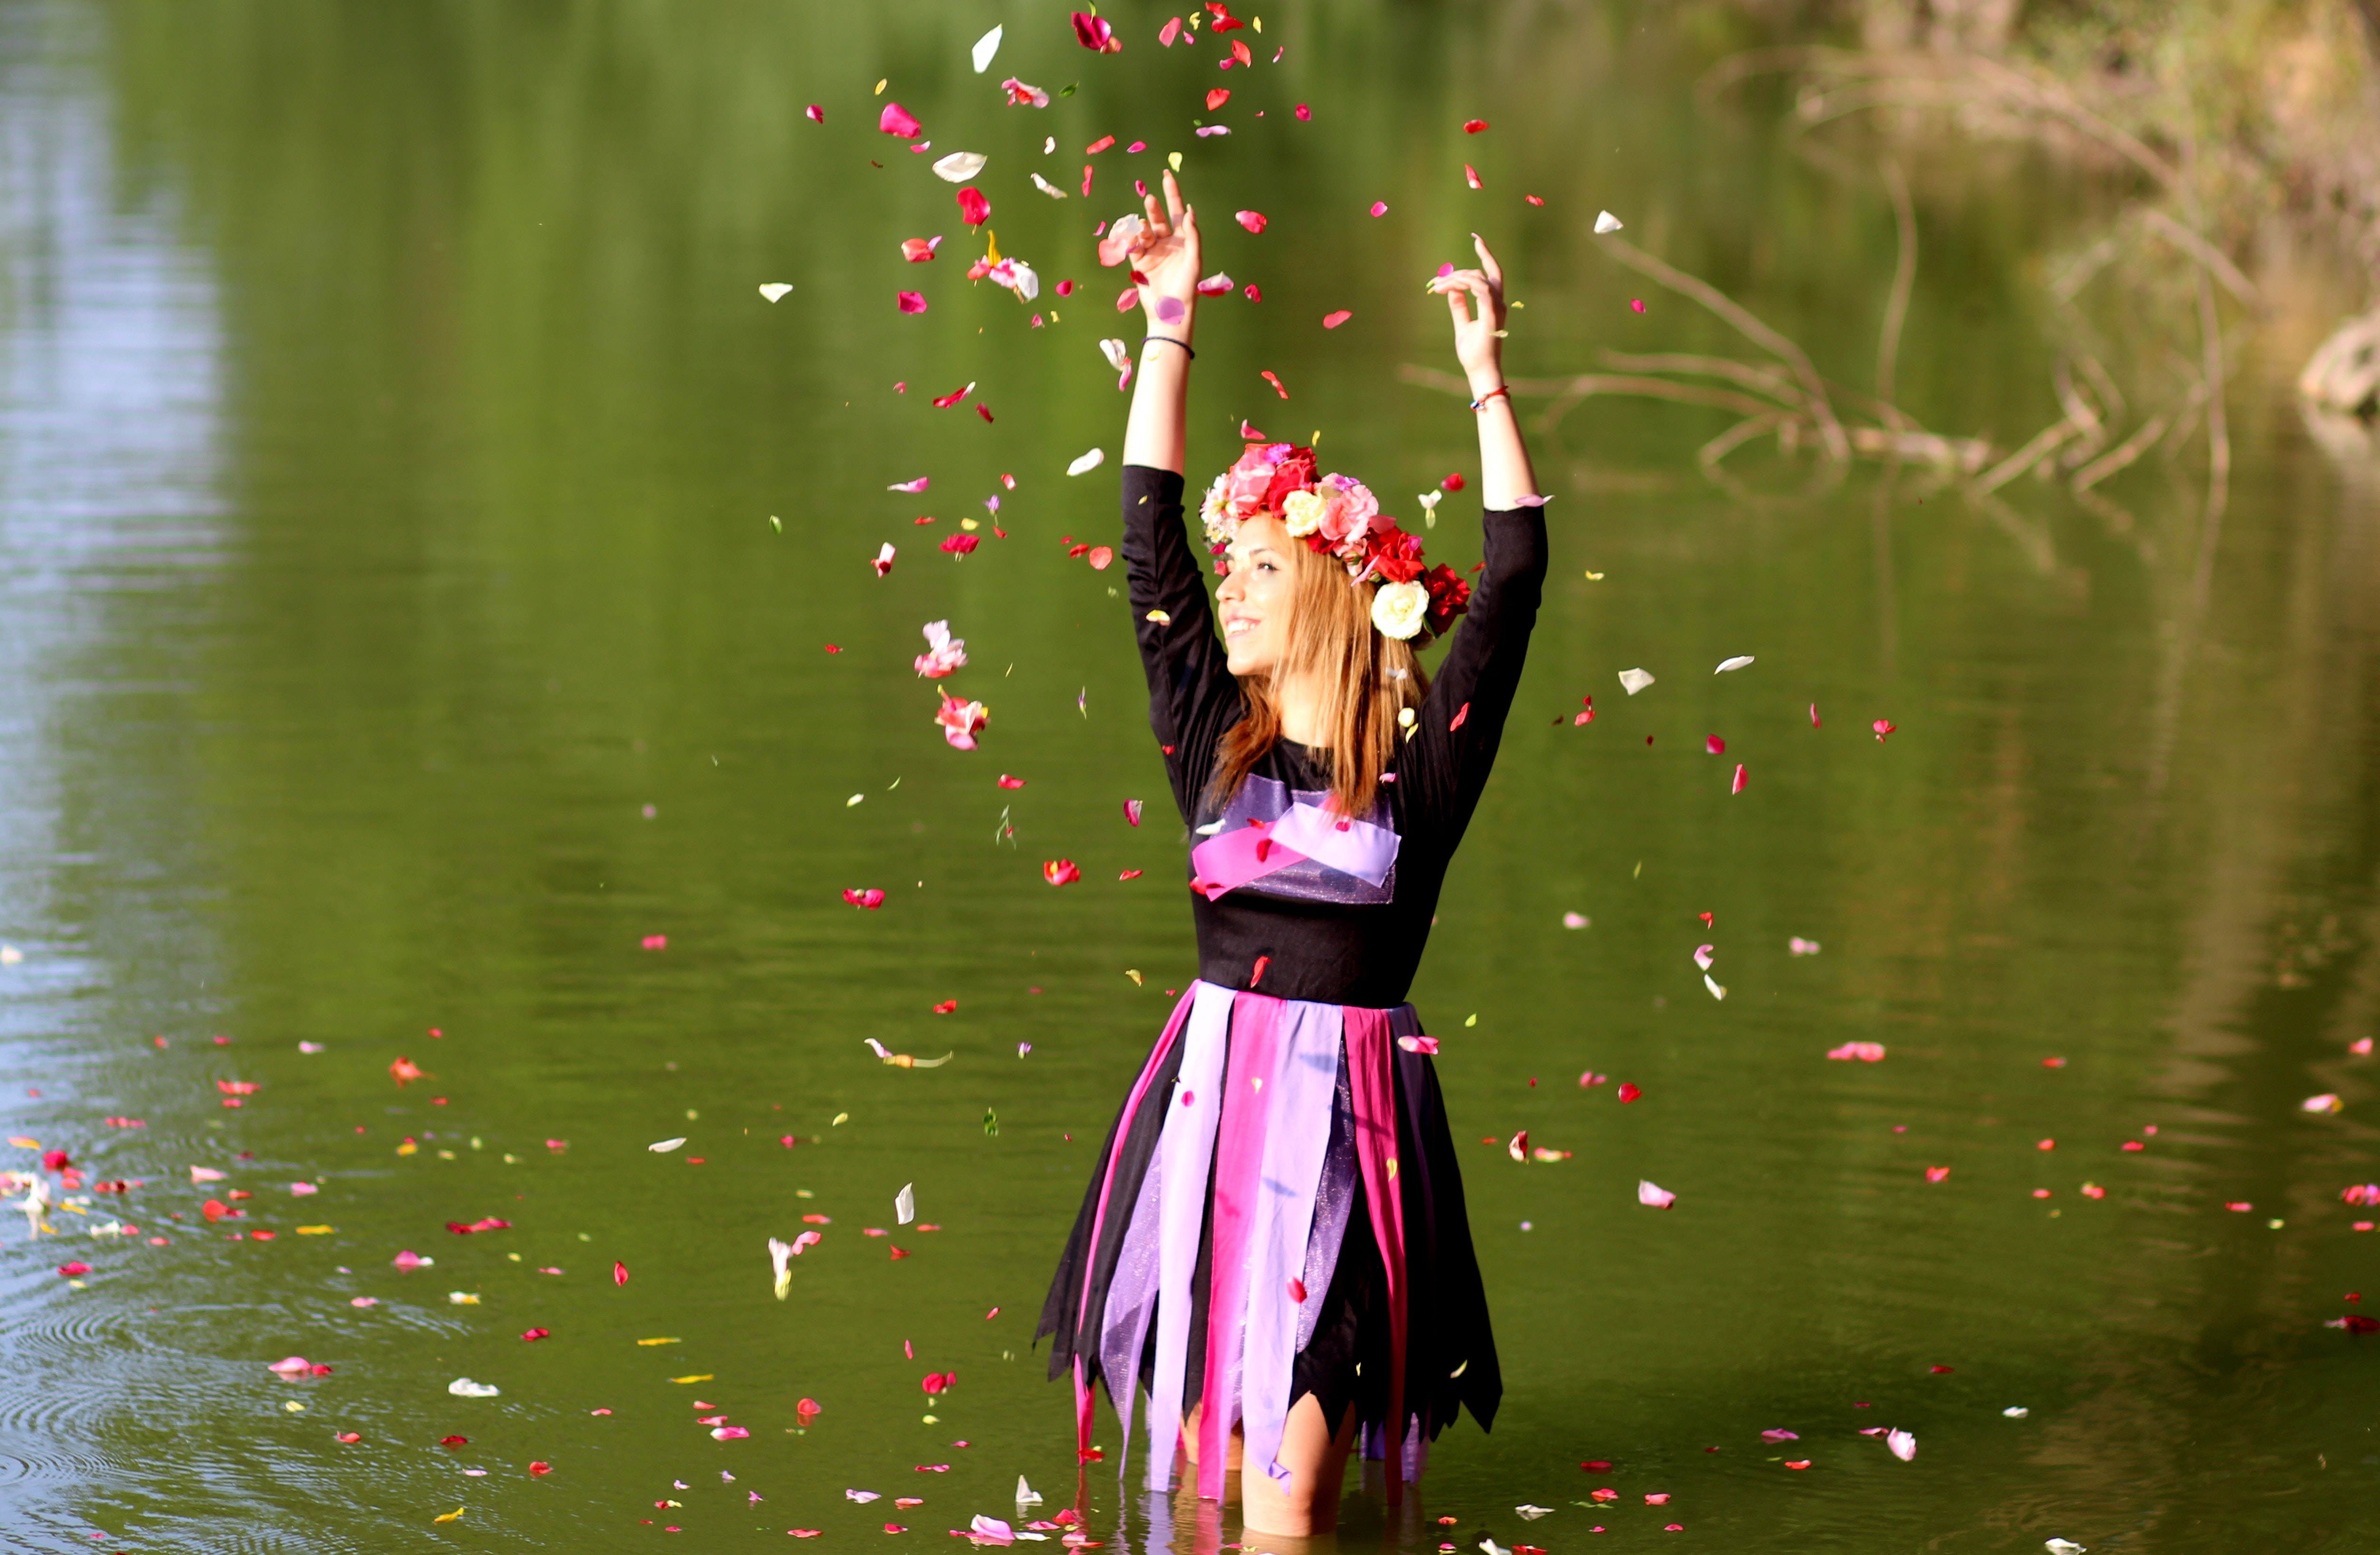 Time lapse photo of woman standing in green body of water while pouring flower petals on air during daytime